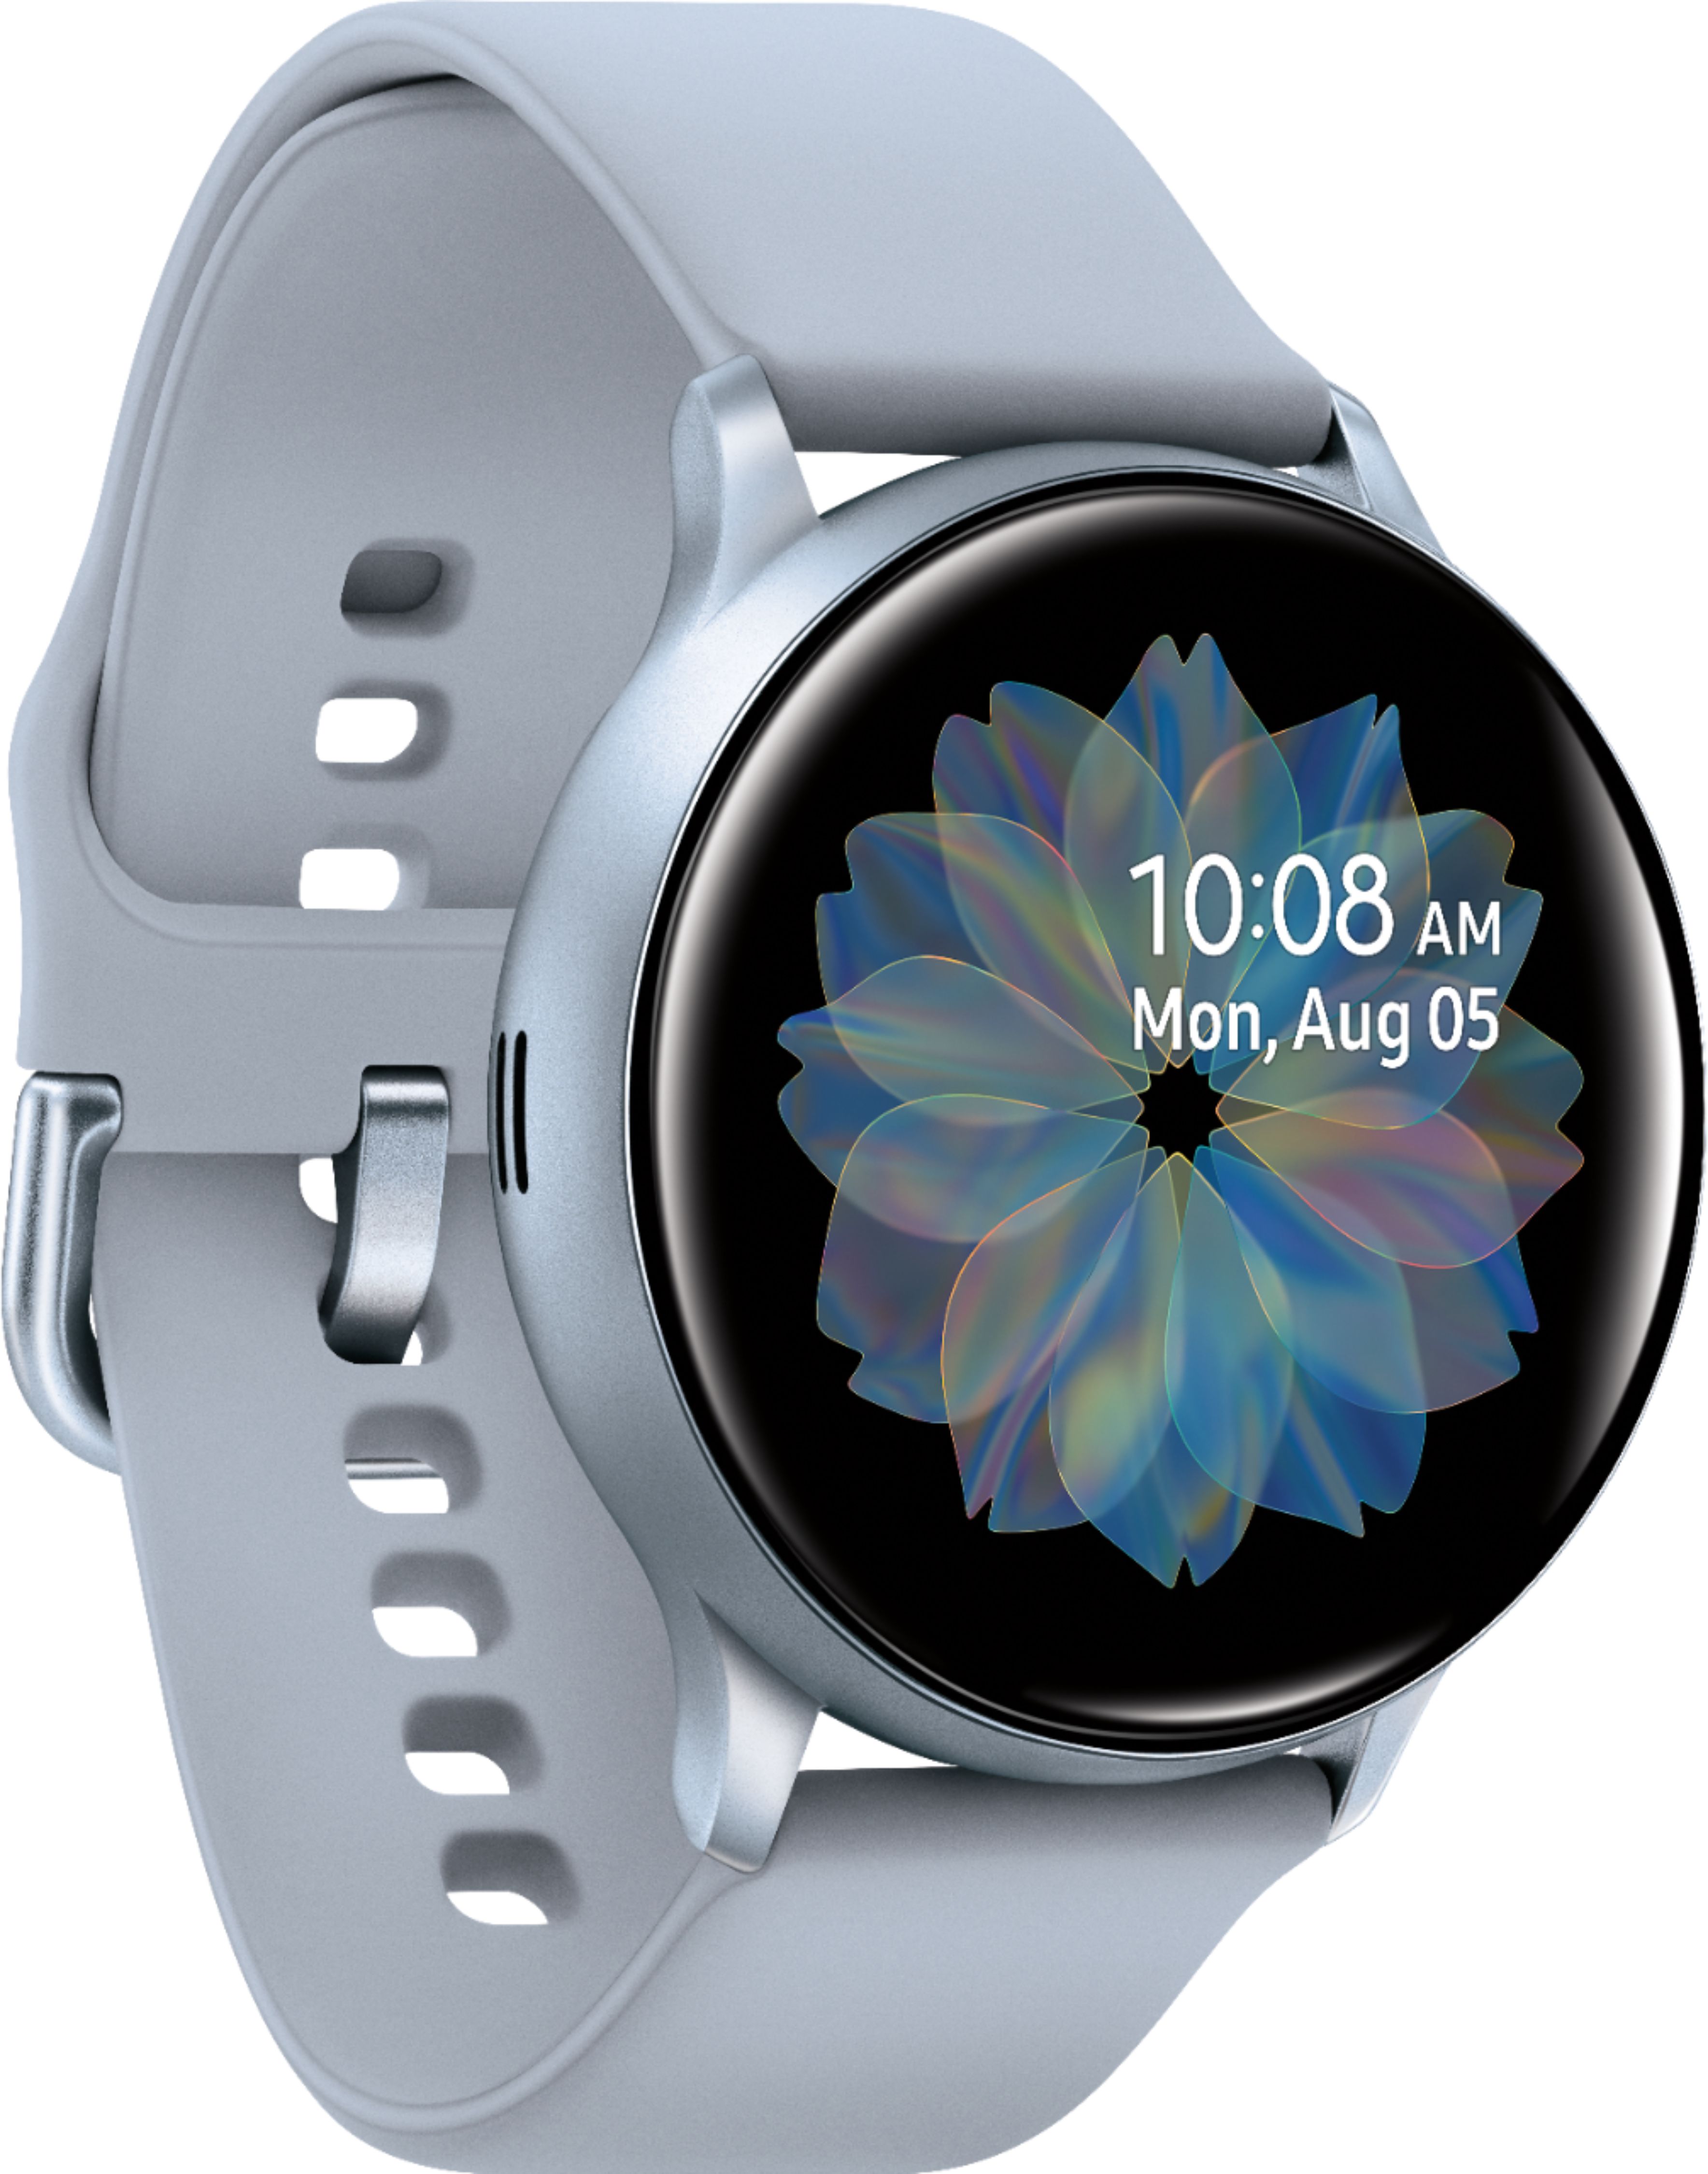 Angle View: Samsung - Geek Squad Certified Refurbished Galaxy Watch Active2 Smartwatch 40mm Aluminum - Cloud Silver